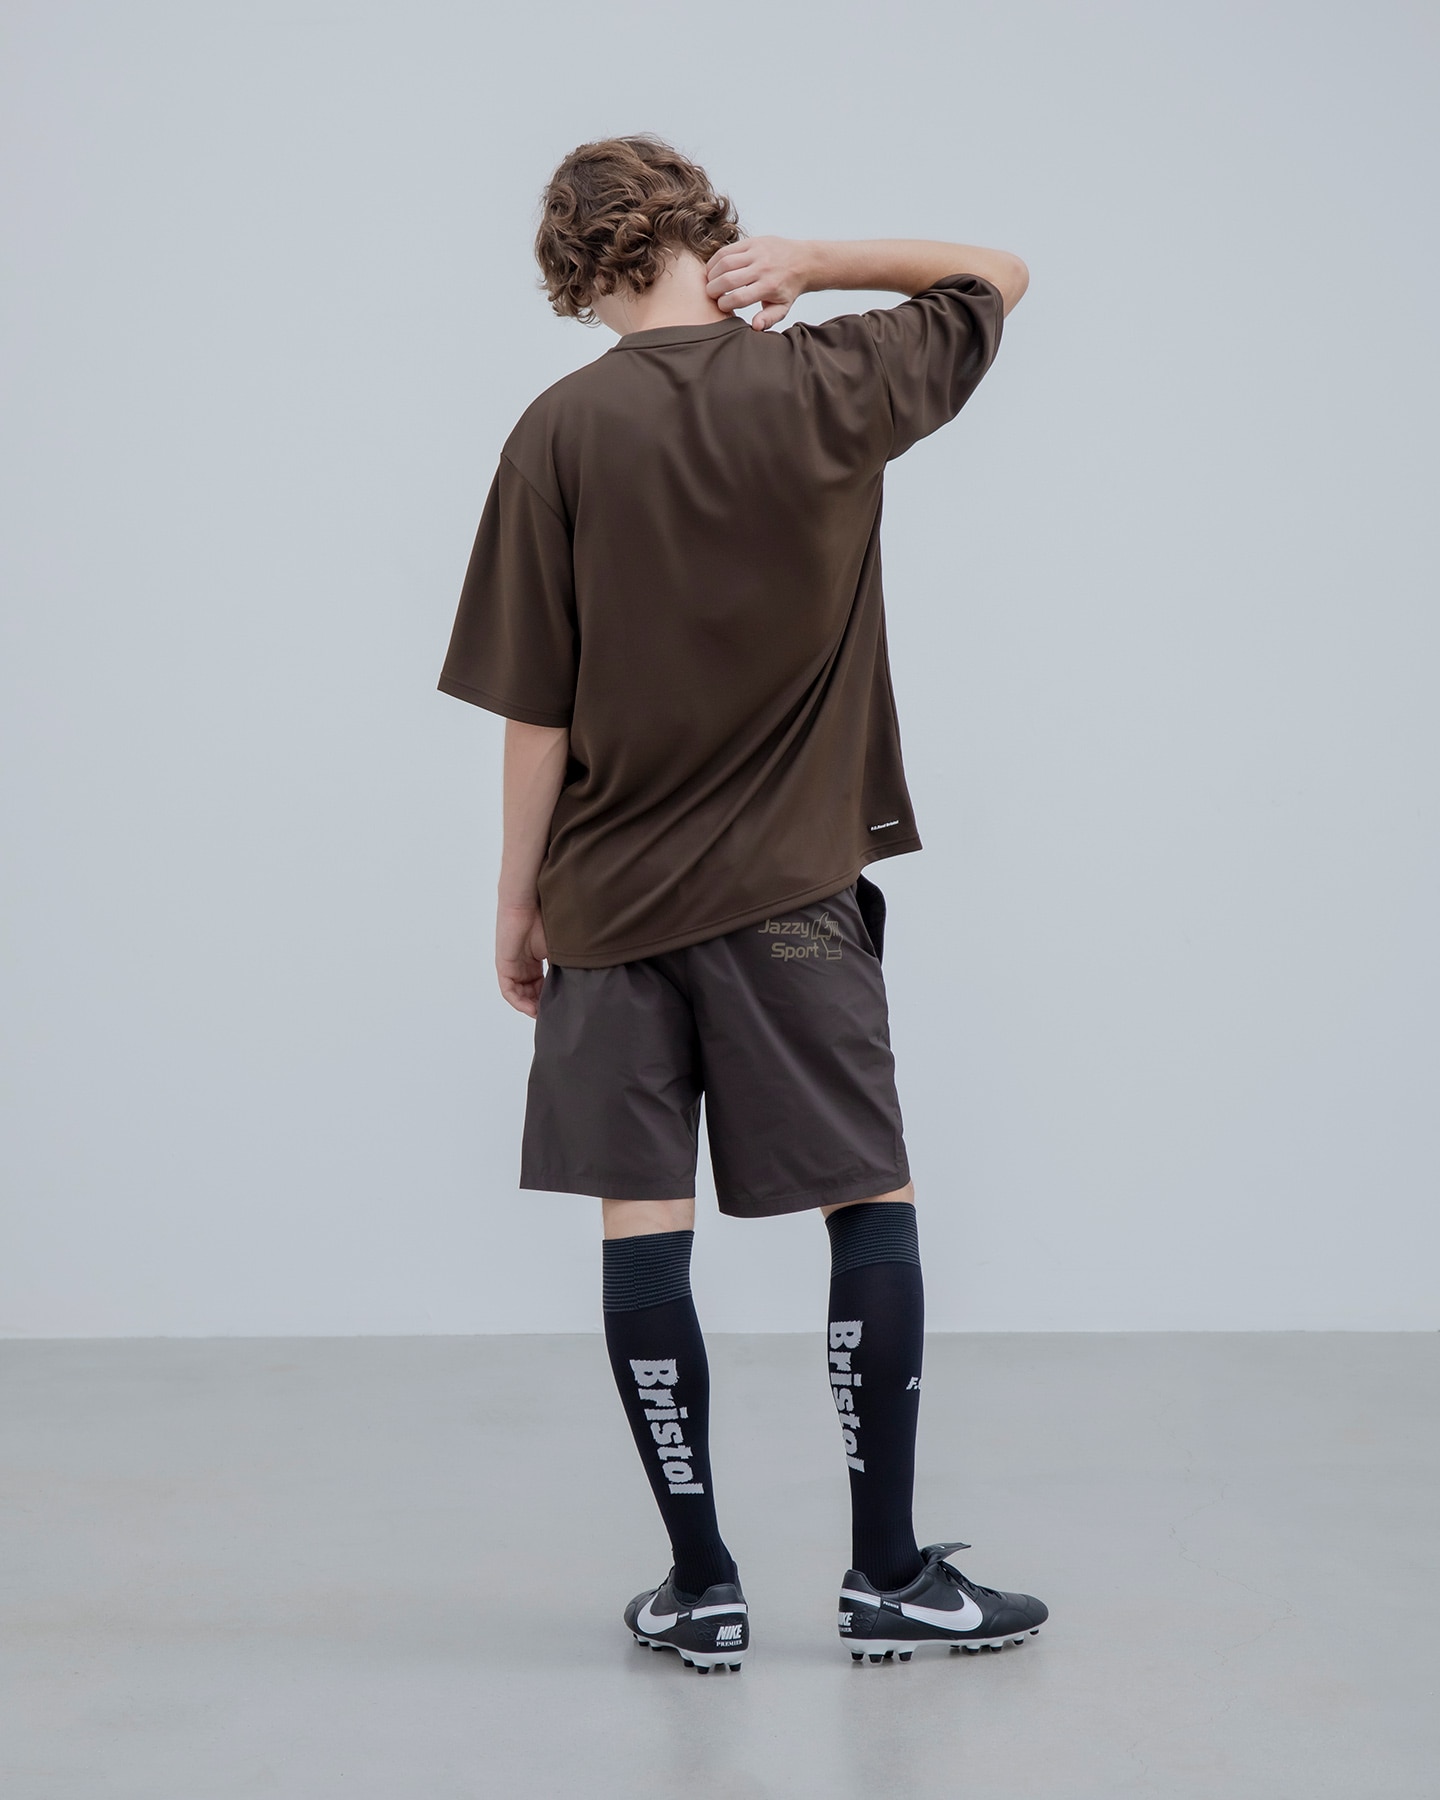 SOPH. | JAZZY SPORT S/S GAME SHIRT(M BROWN):